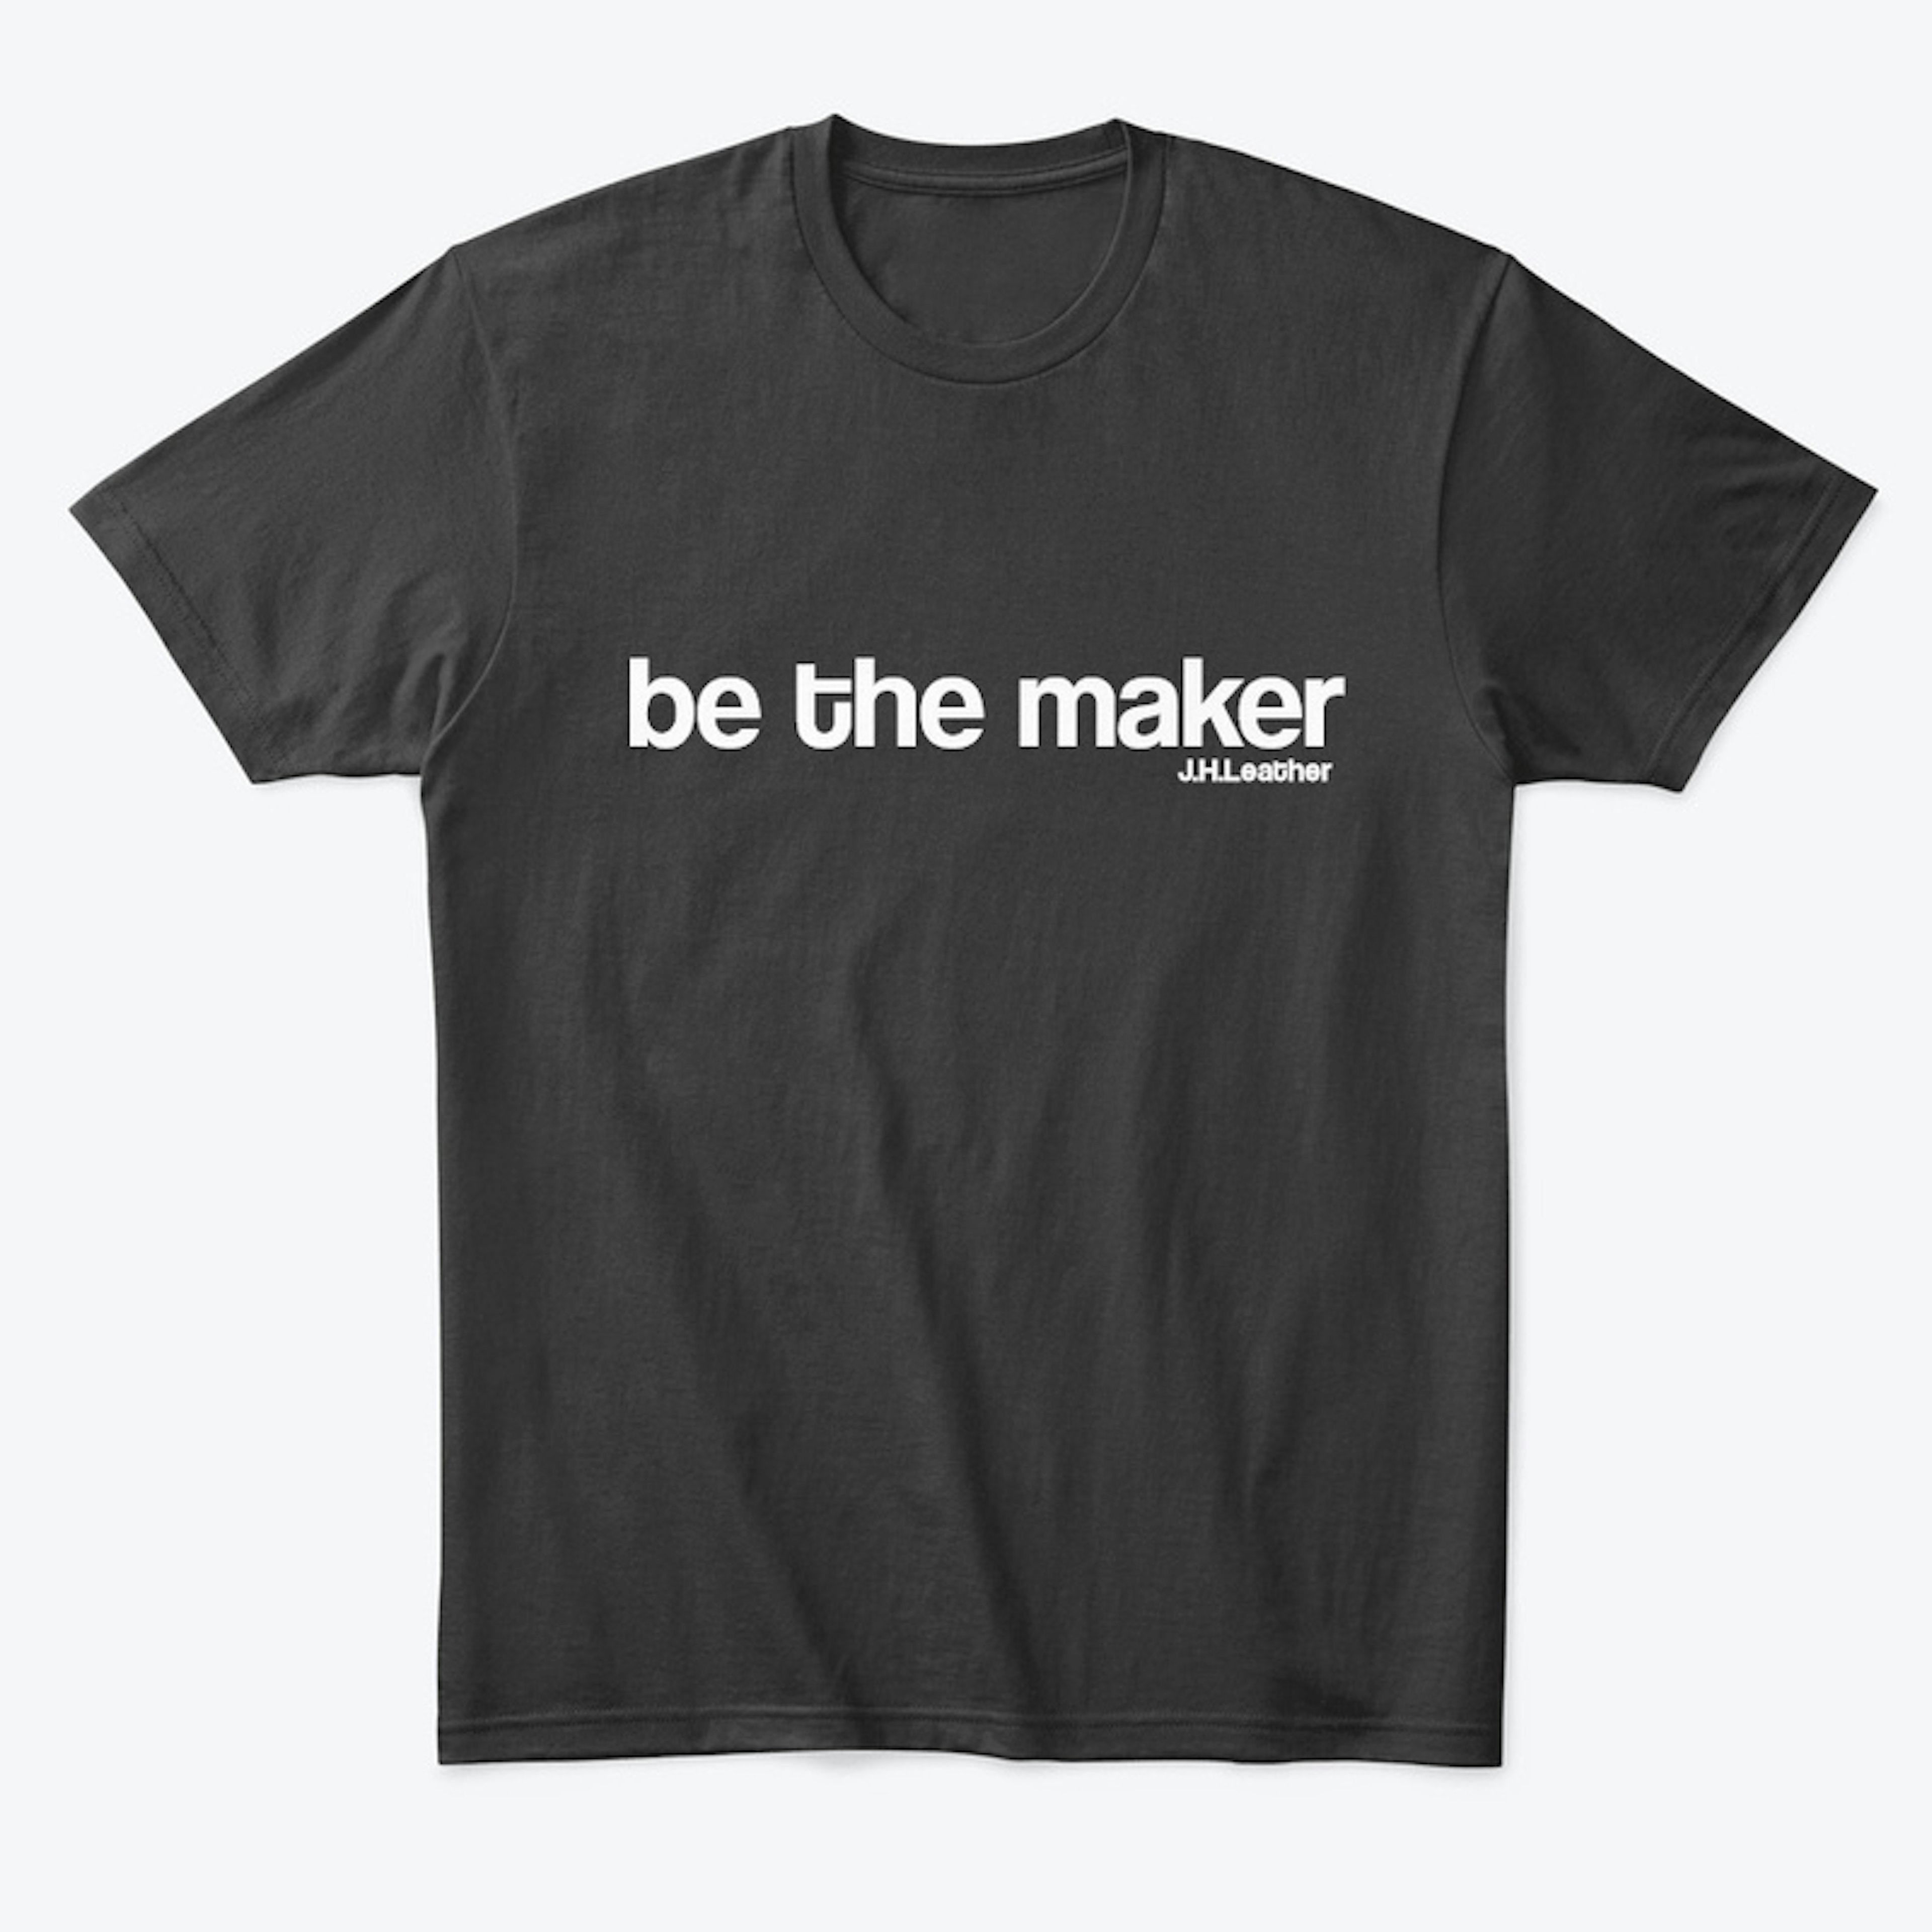 be the maker